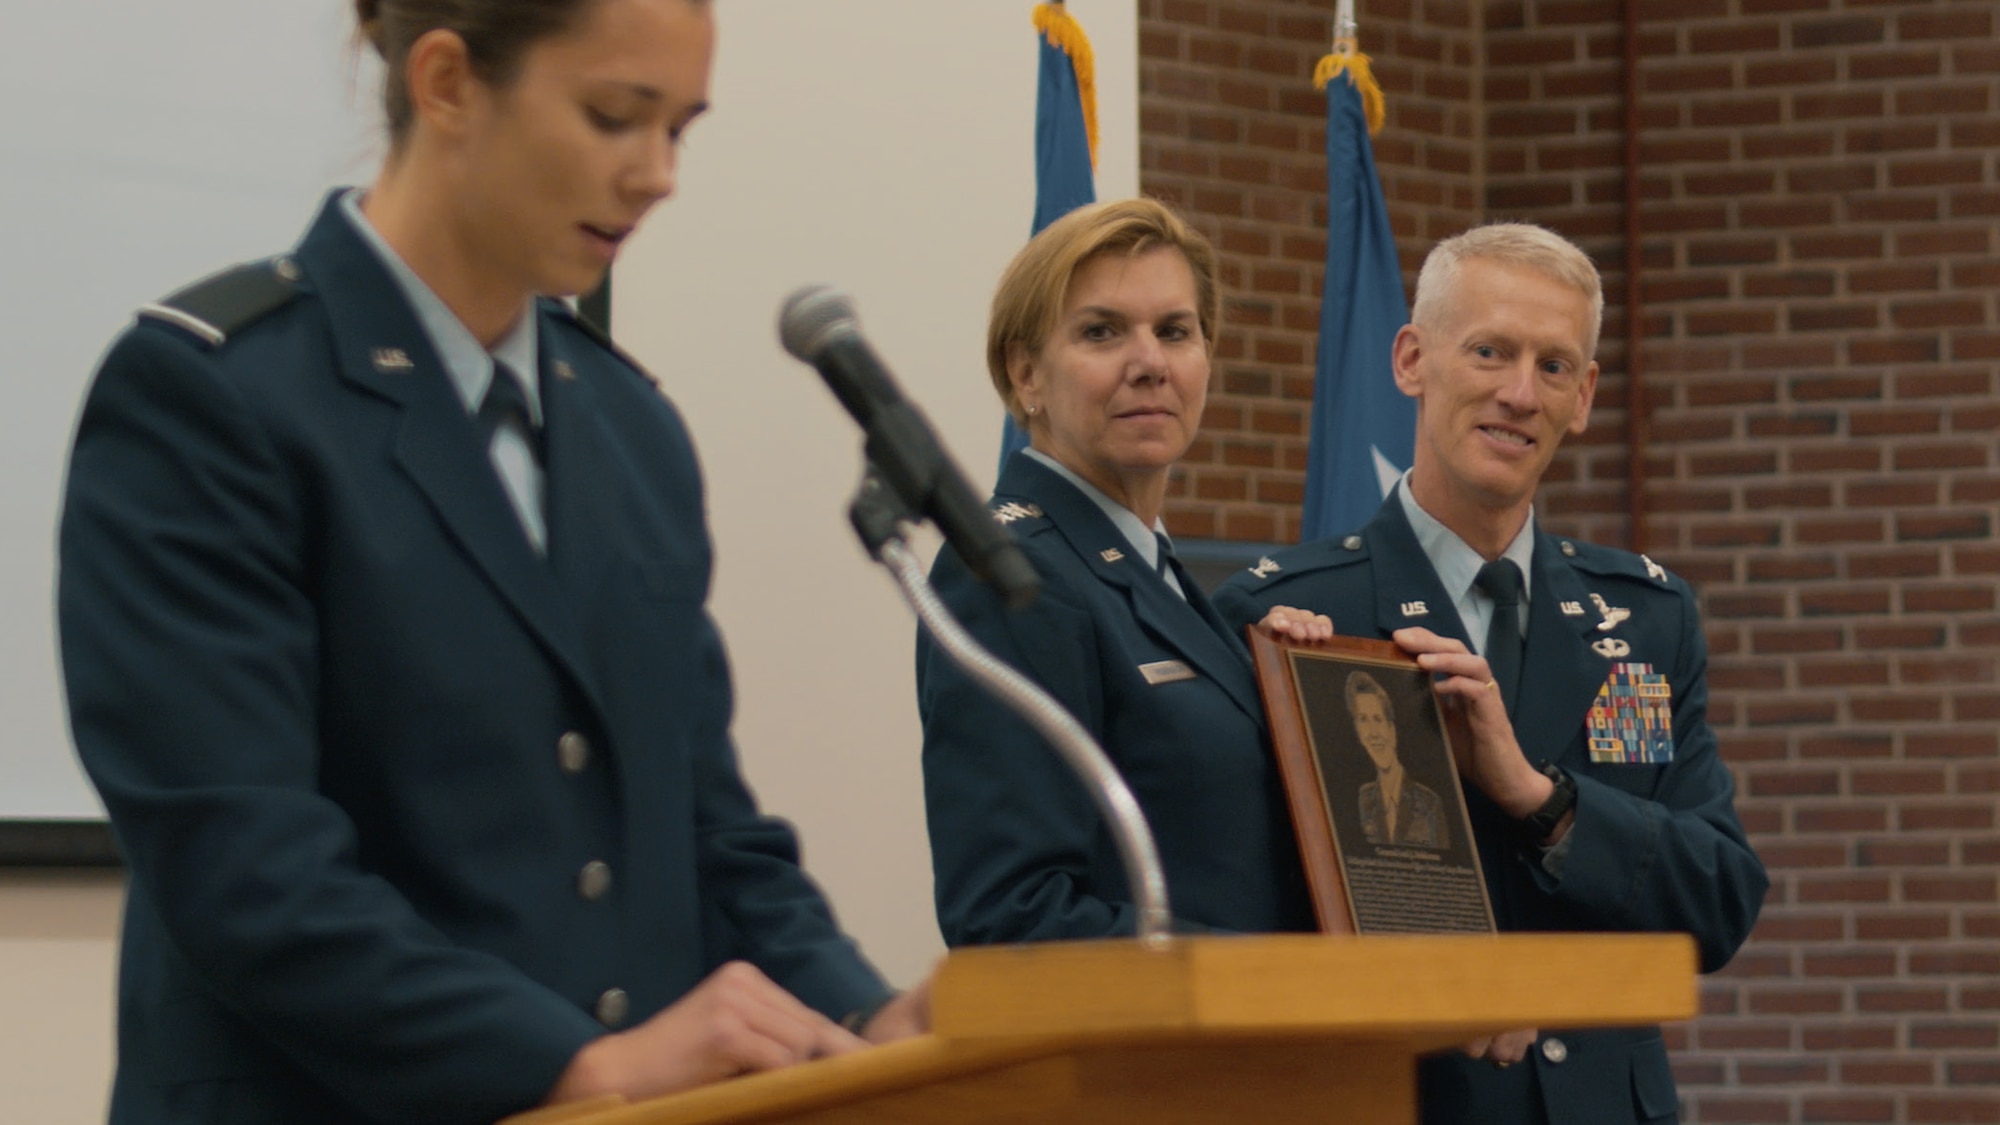 Air Force ROTC honors former NORAD commander with distinguished alum award